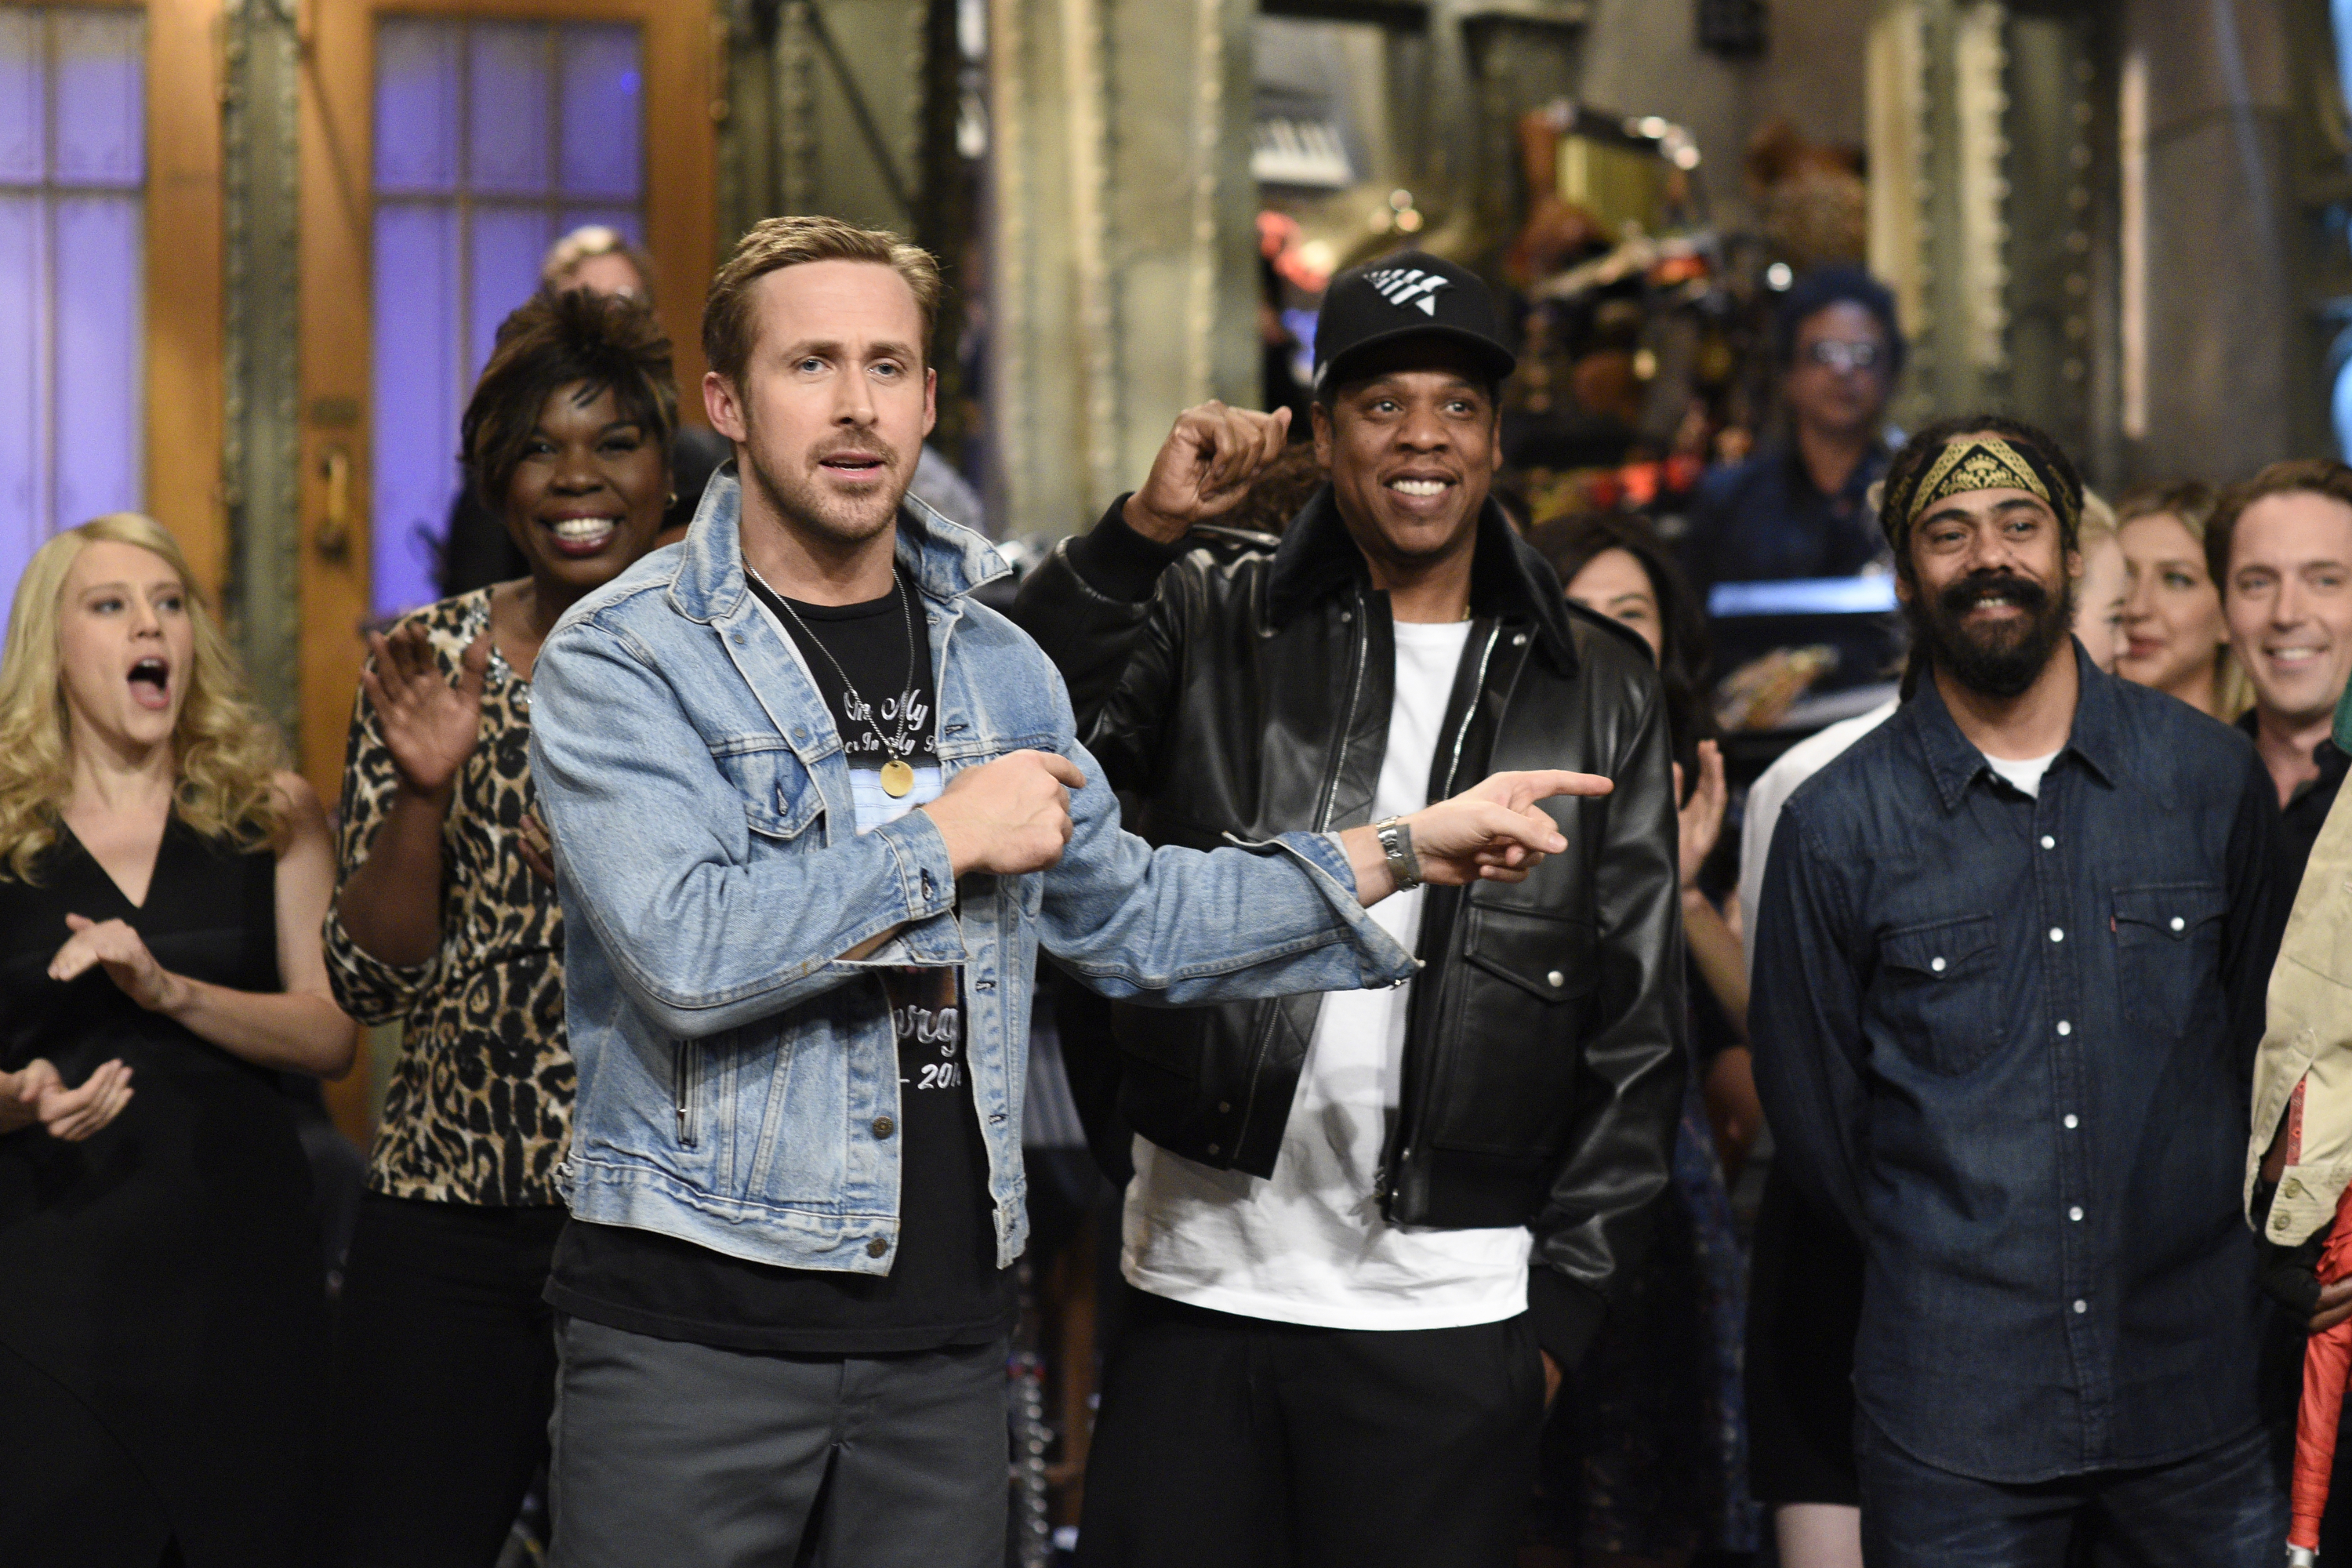 Ryan Gosling, Jay Z and cast on "Saturday Night Live" on Sept. 30, 2017 (Will Heath—NBCU/Getty Images)